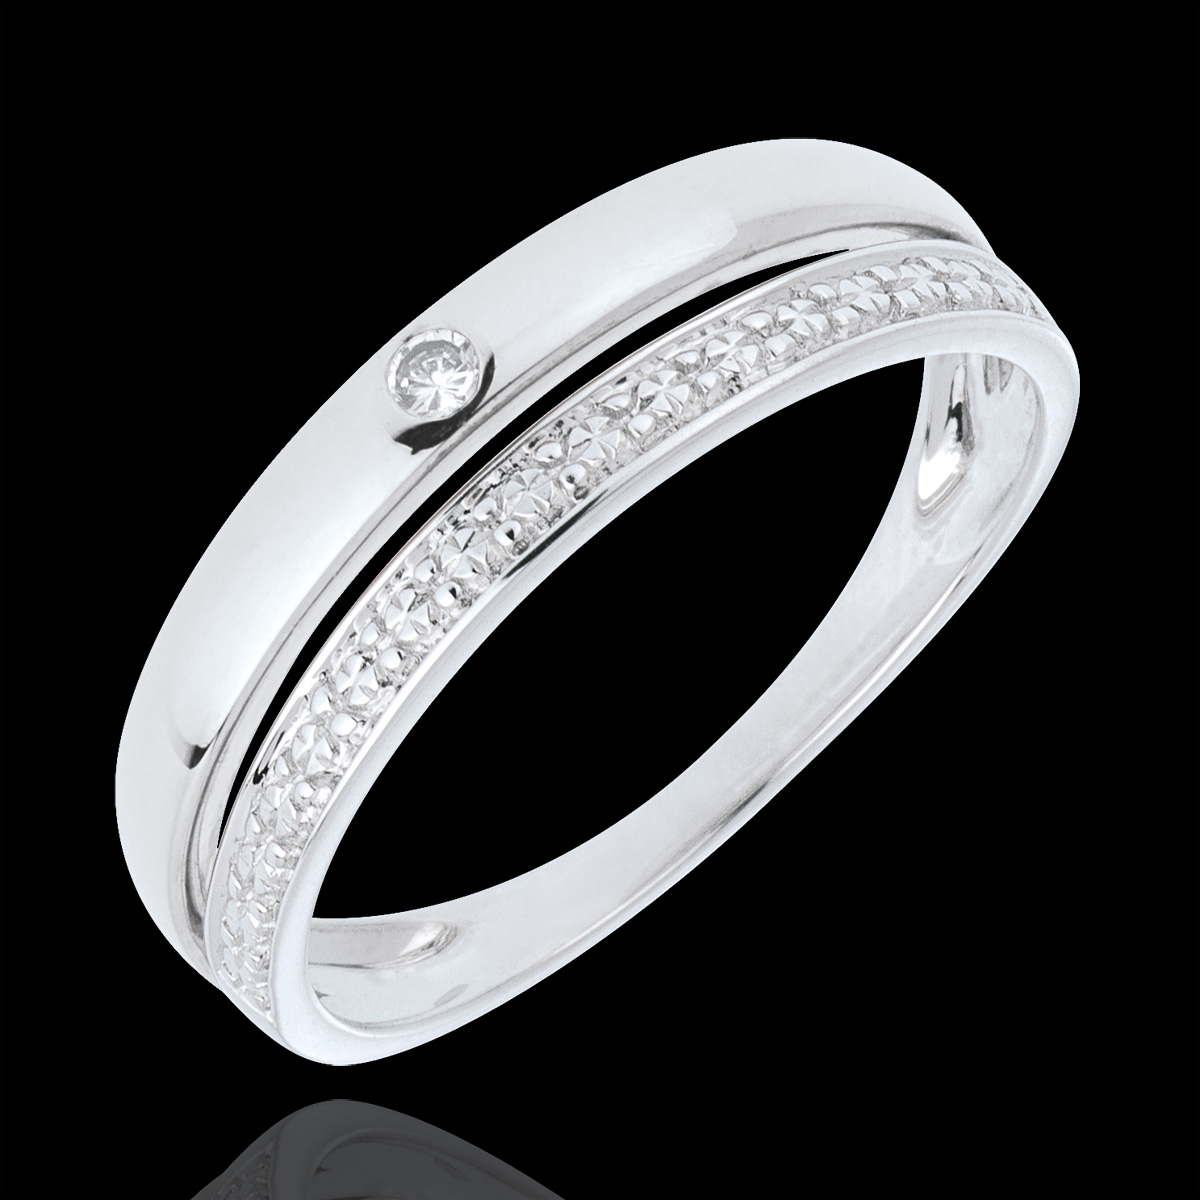 Pretty Wedding Ring - White gold - 9 carats : Edenly jewellery